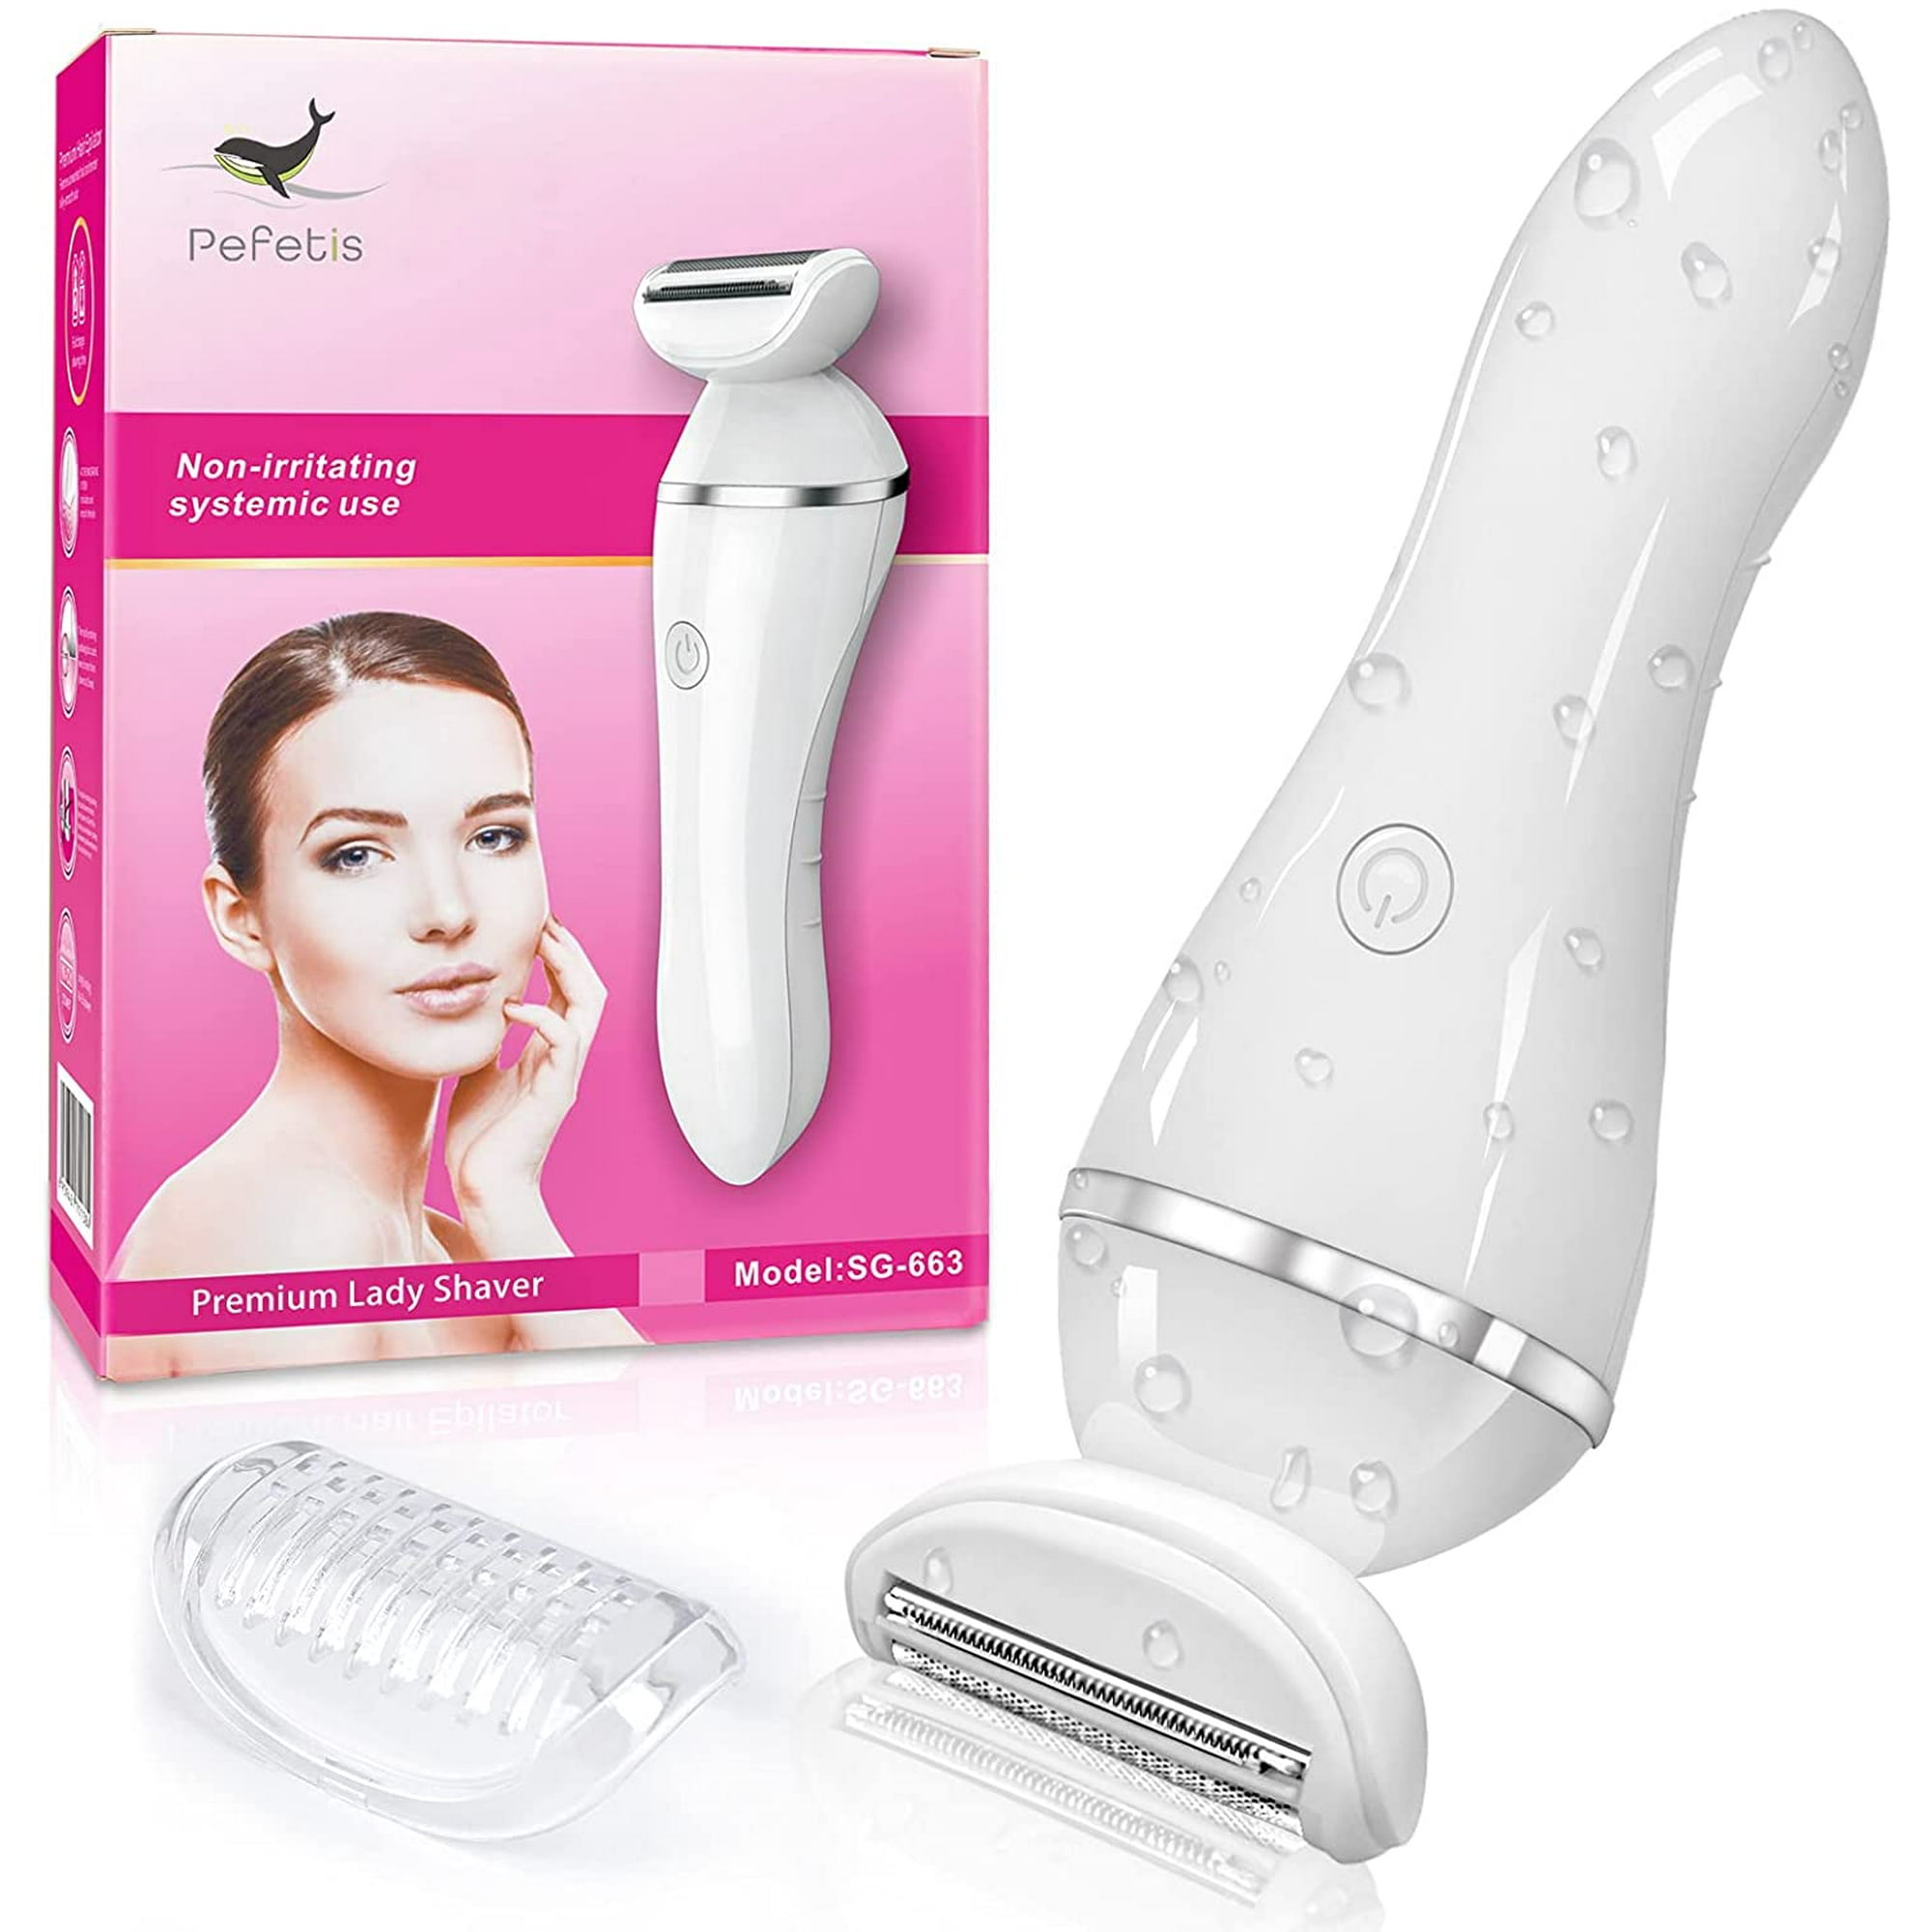 Electric Razor for Women, Womens Shaver for Pubic Hair Bikini Trimmer 3 in  1 Wet & Dry Painless Rechargeable Body Hair Removal for Shaving Legs, Bikini  Line, Arms and Underarms | Walmart Canada